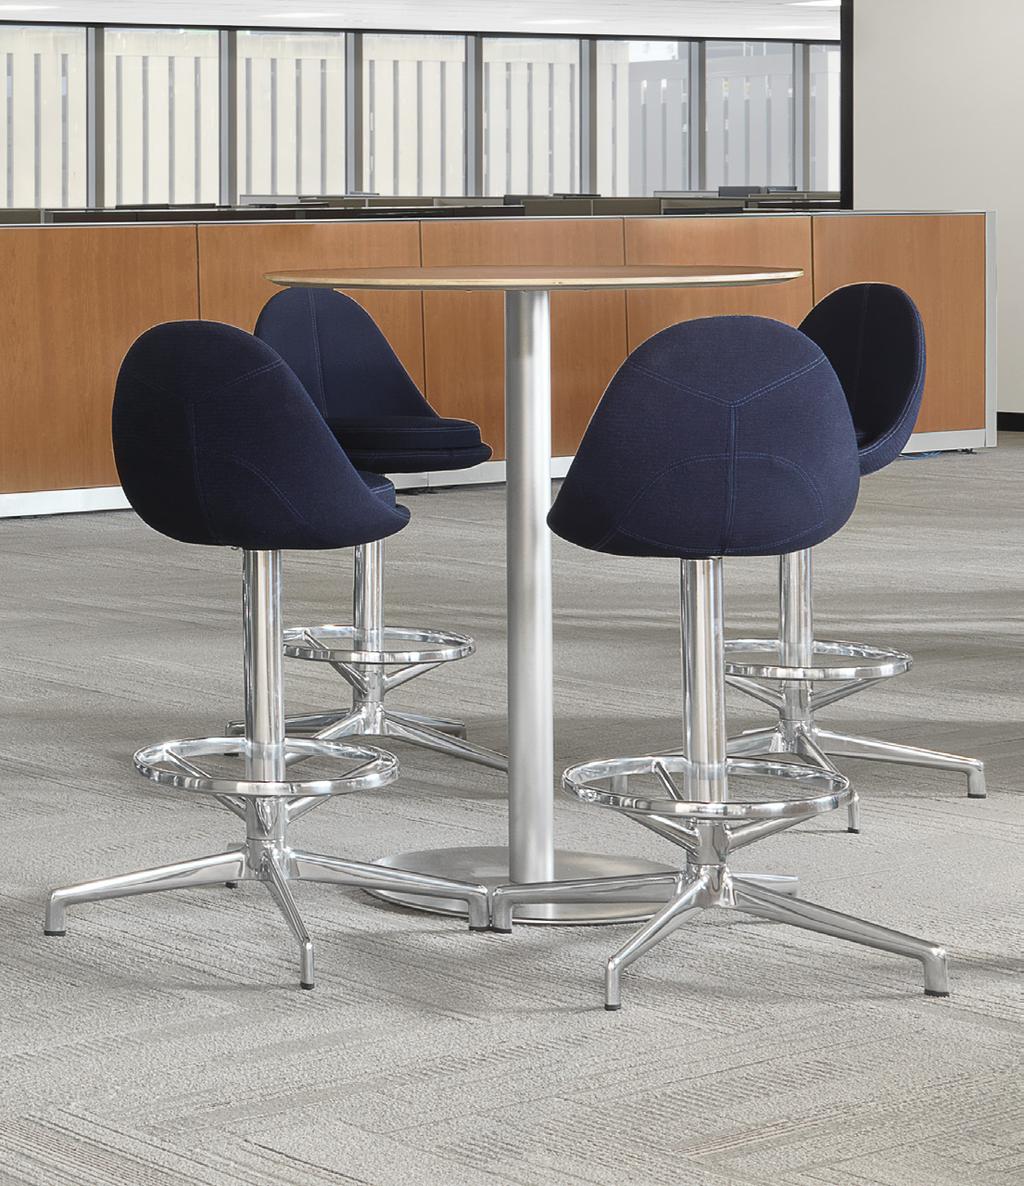 Juxta tables are part of the innovative collection of seating